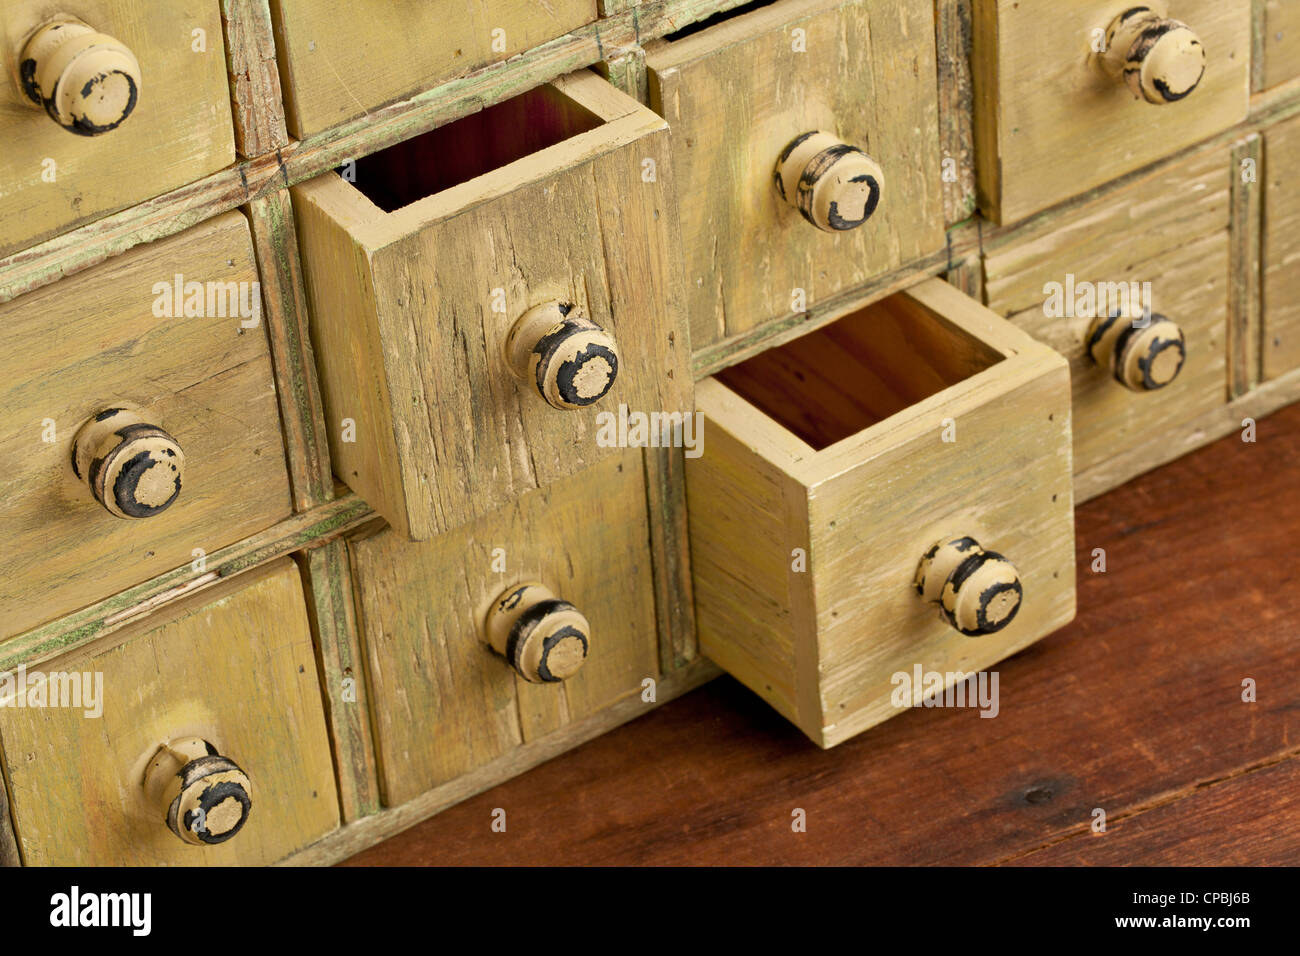 drawers of primitive vintage grunge wood apothecary cabinet Stock Photo